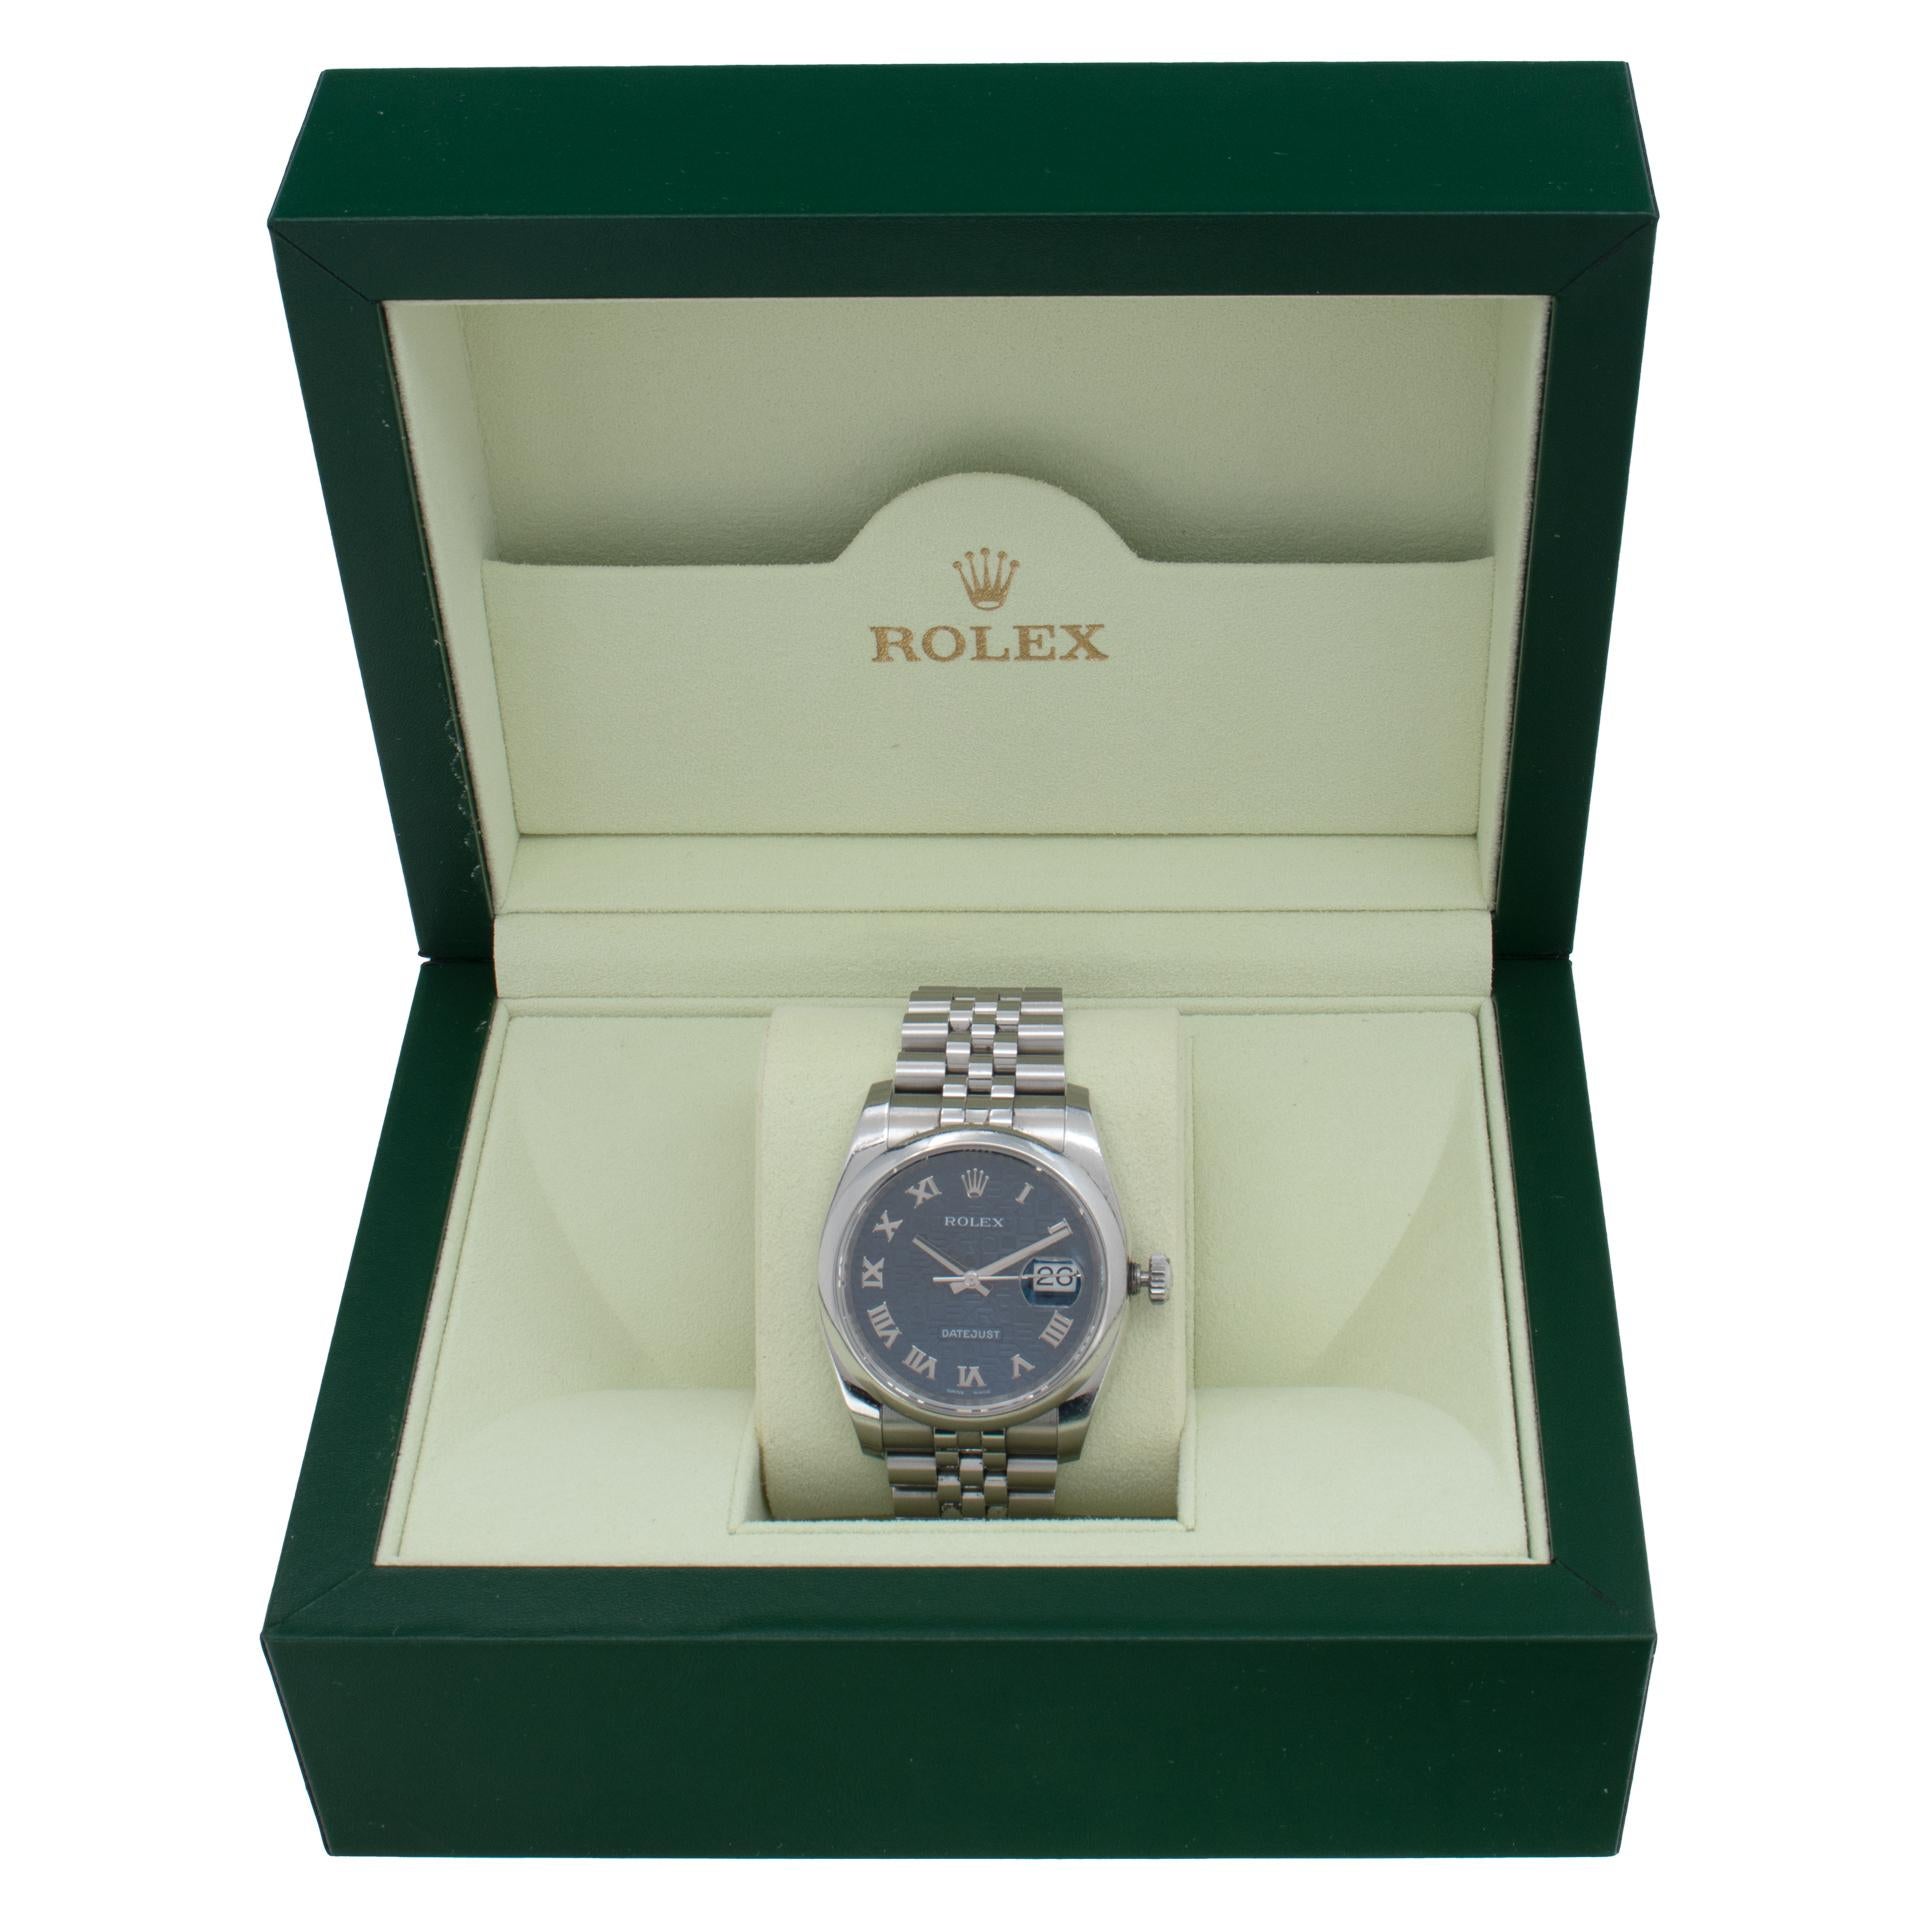 Rolex Datejust 116200 in Stainless Steel with a Blue dial 36mm Automatic watch For Sale 1